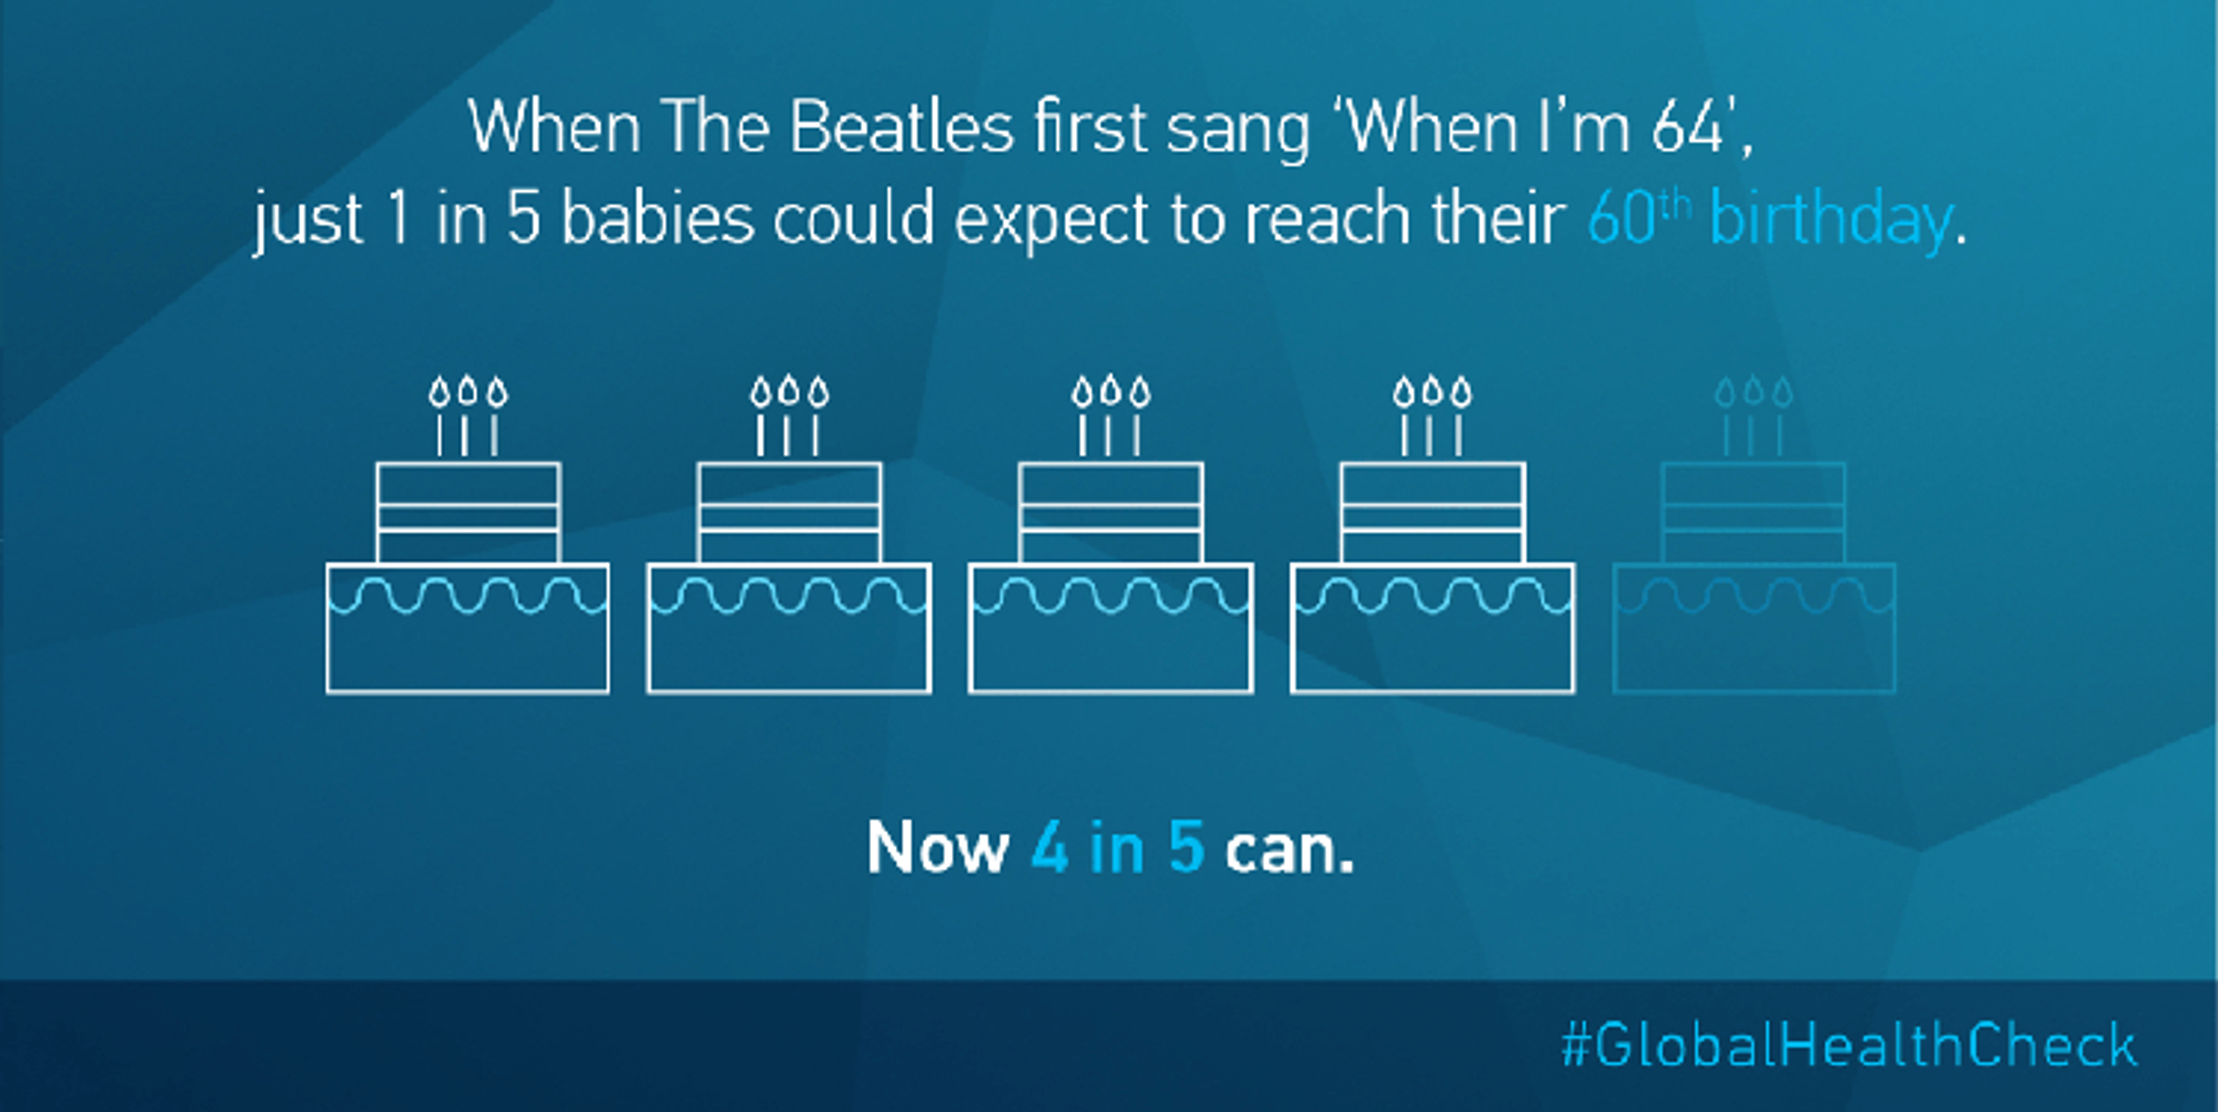 A graphic with the heading 'When The Beatles first sand 'When I'm 64', just 1 in 5 babies could expect to reach their 60th birthday.' Below this text are five birthday cakes with one slightly faded. At the bottom is the text 'Now 4 in 5 can.''